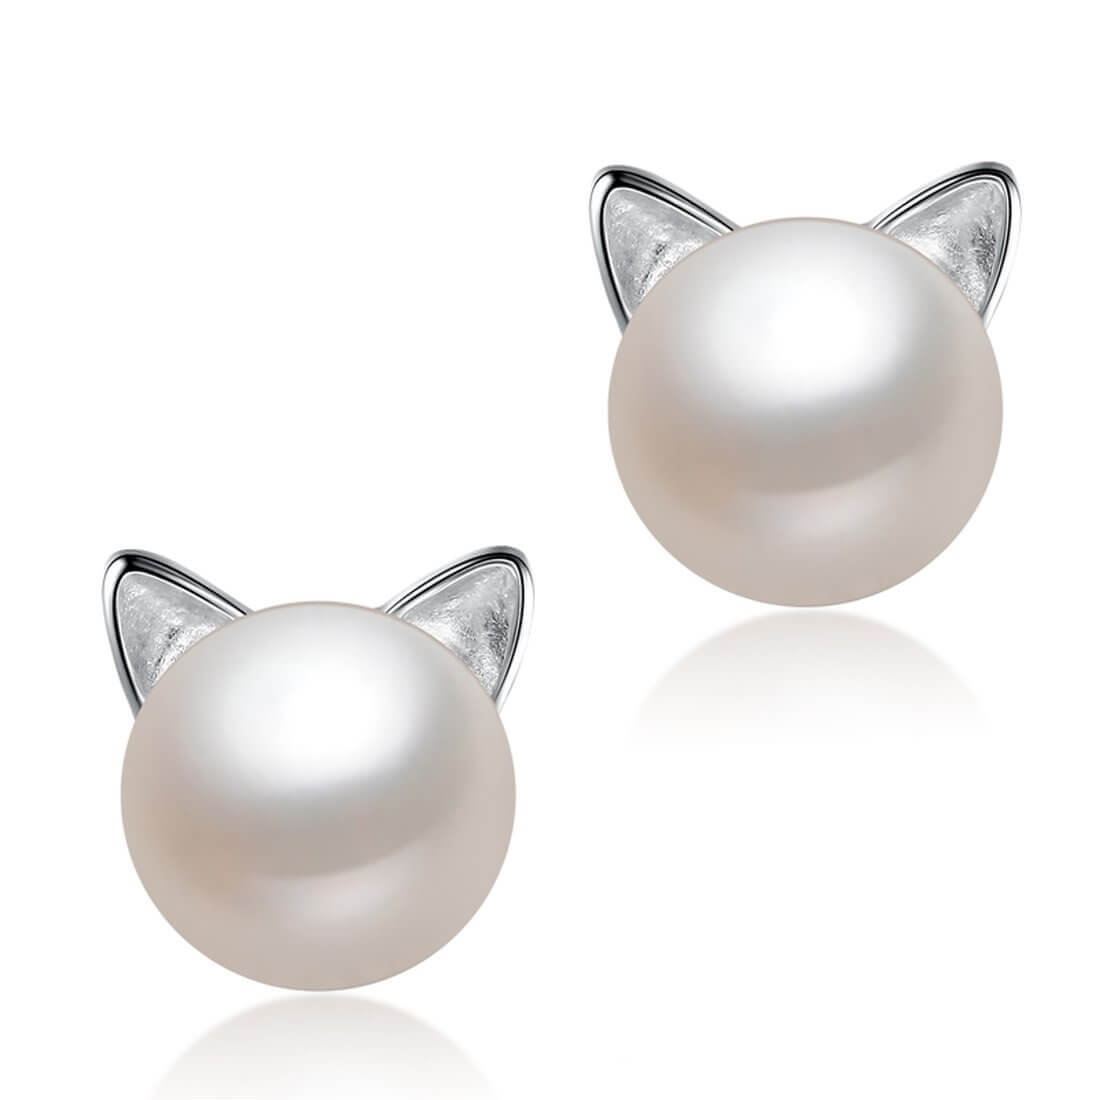 pearl cat earrings plated in 925 sterling silver on white background 4779958